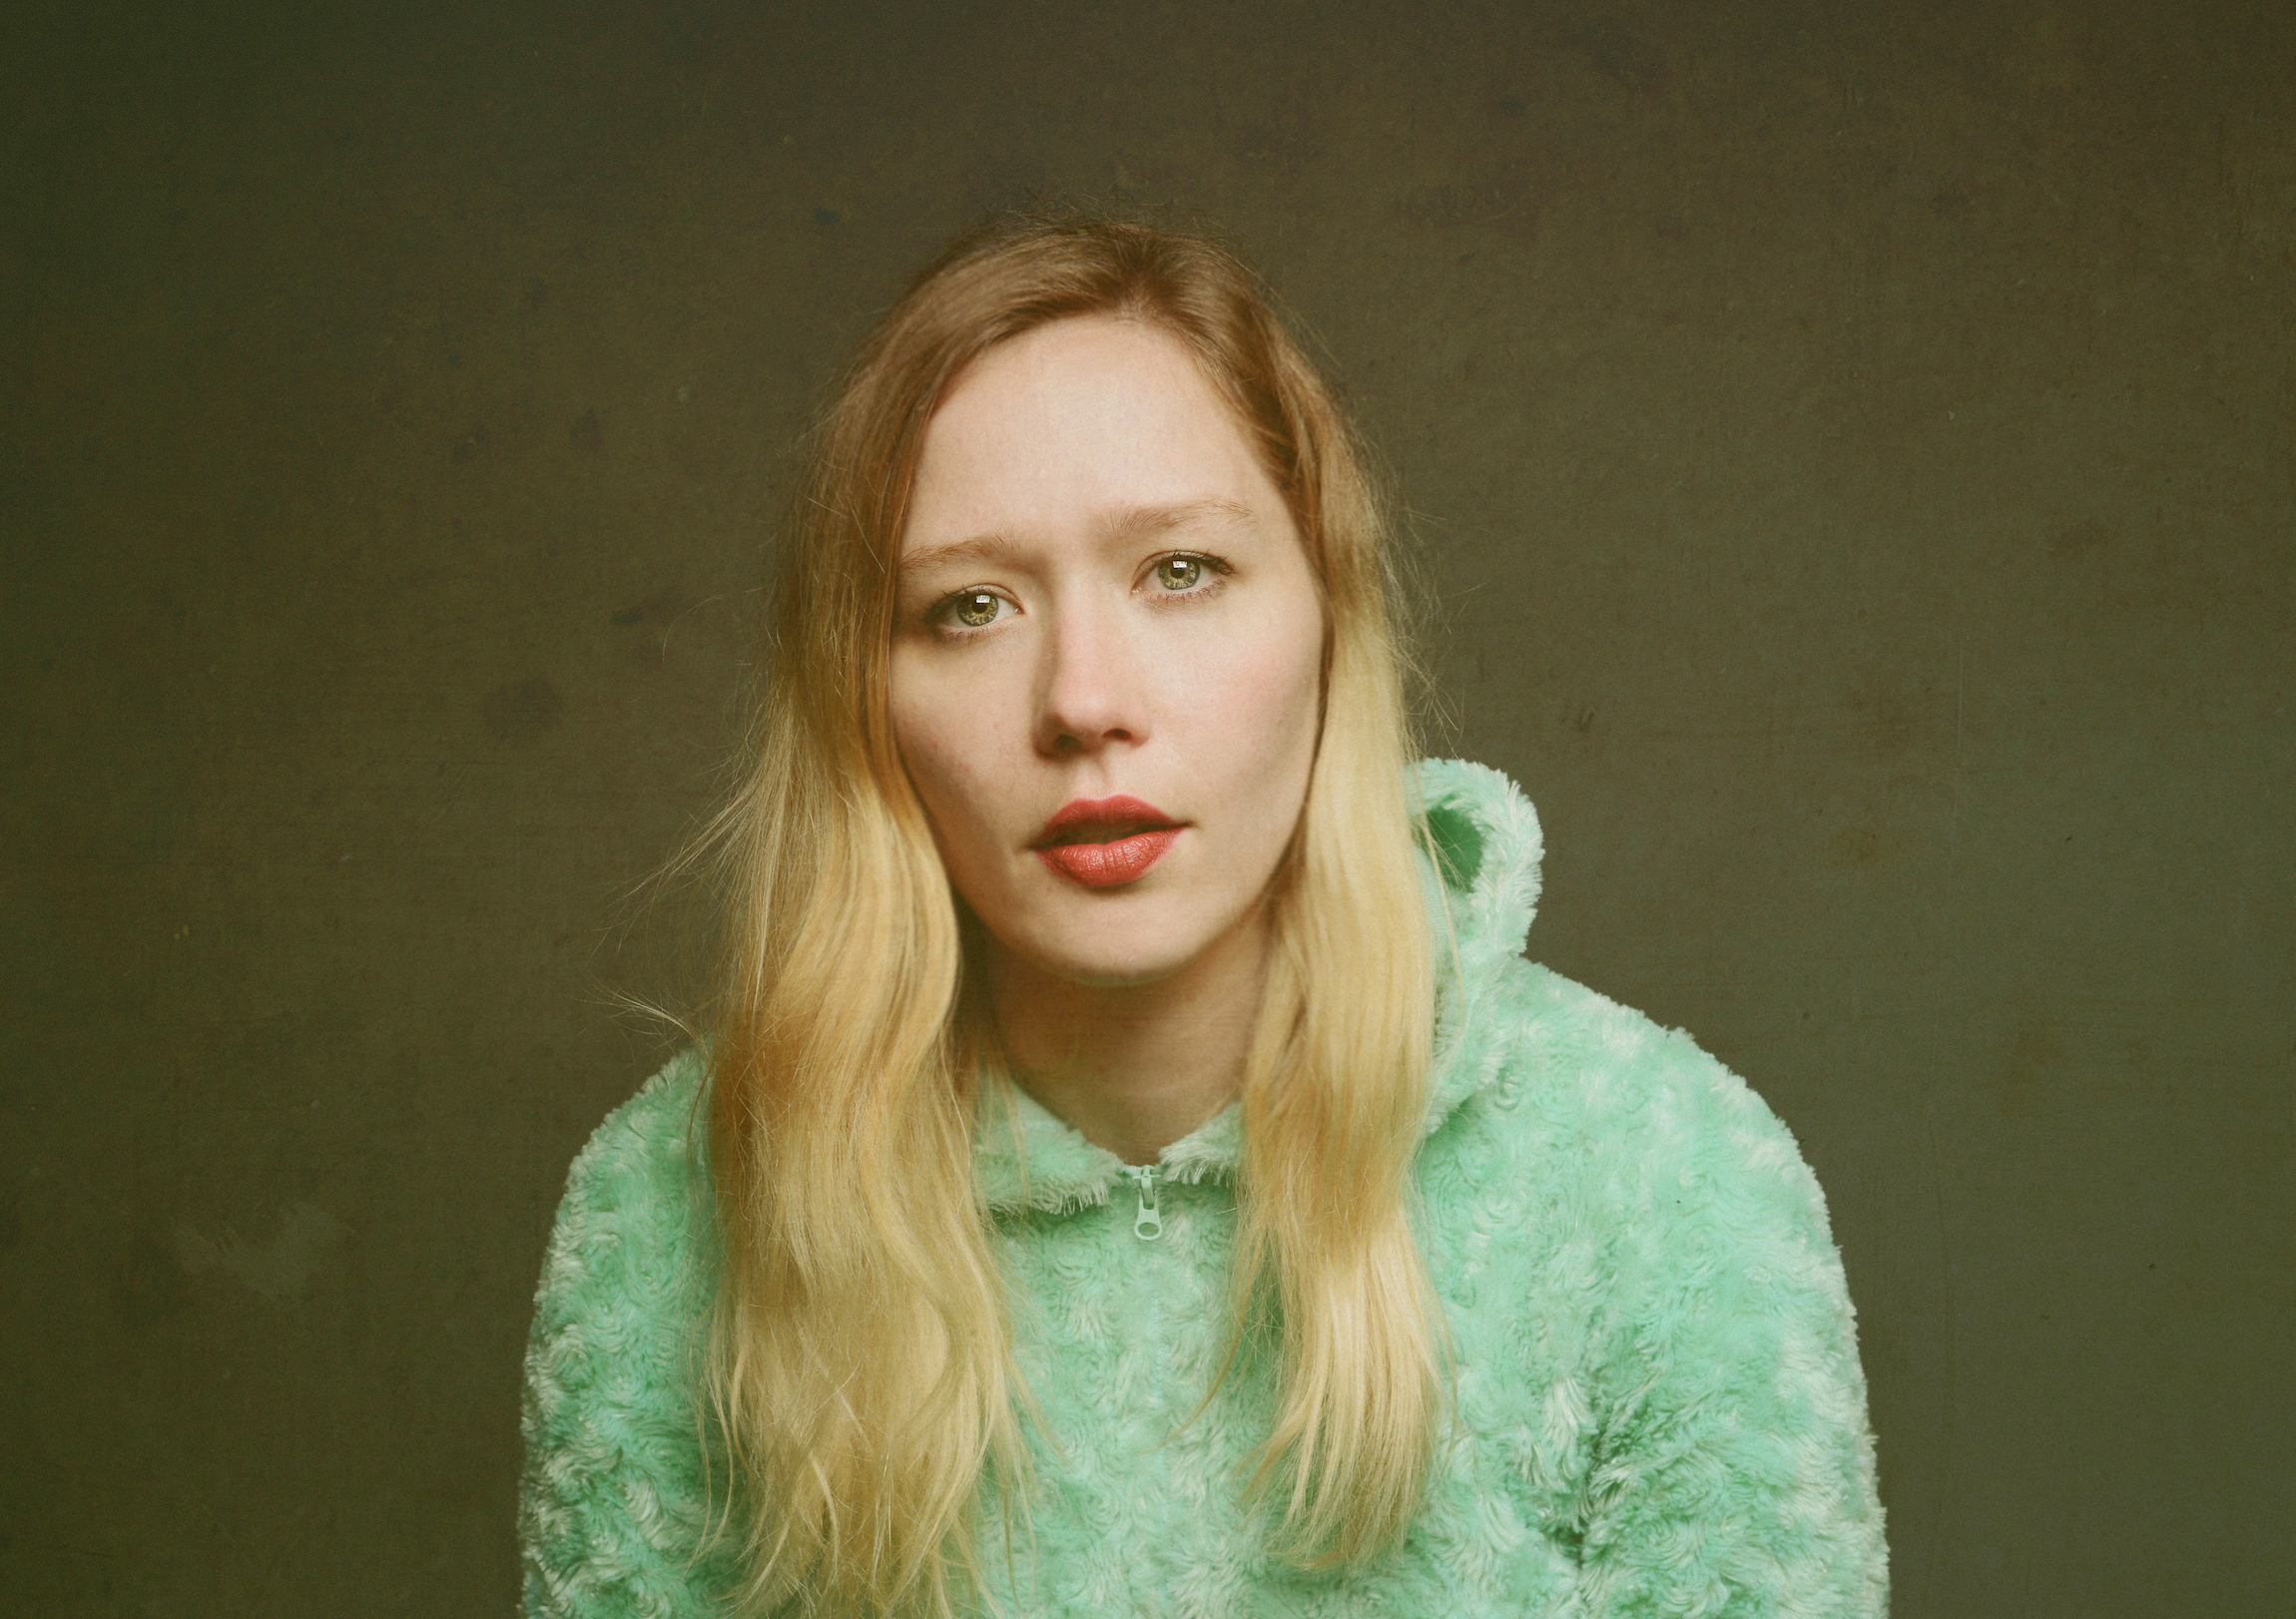 Julia Jacklin's latest album reviewed on IndependentMusicReviews